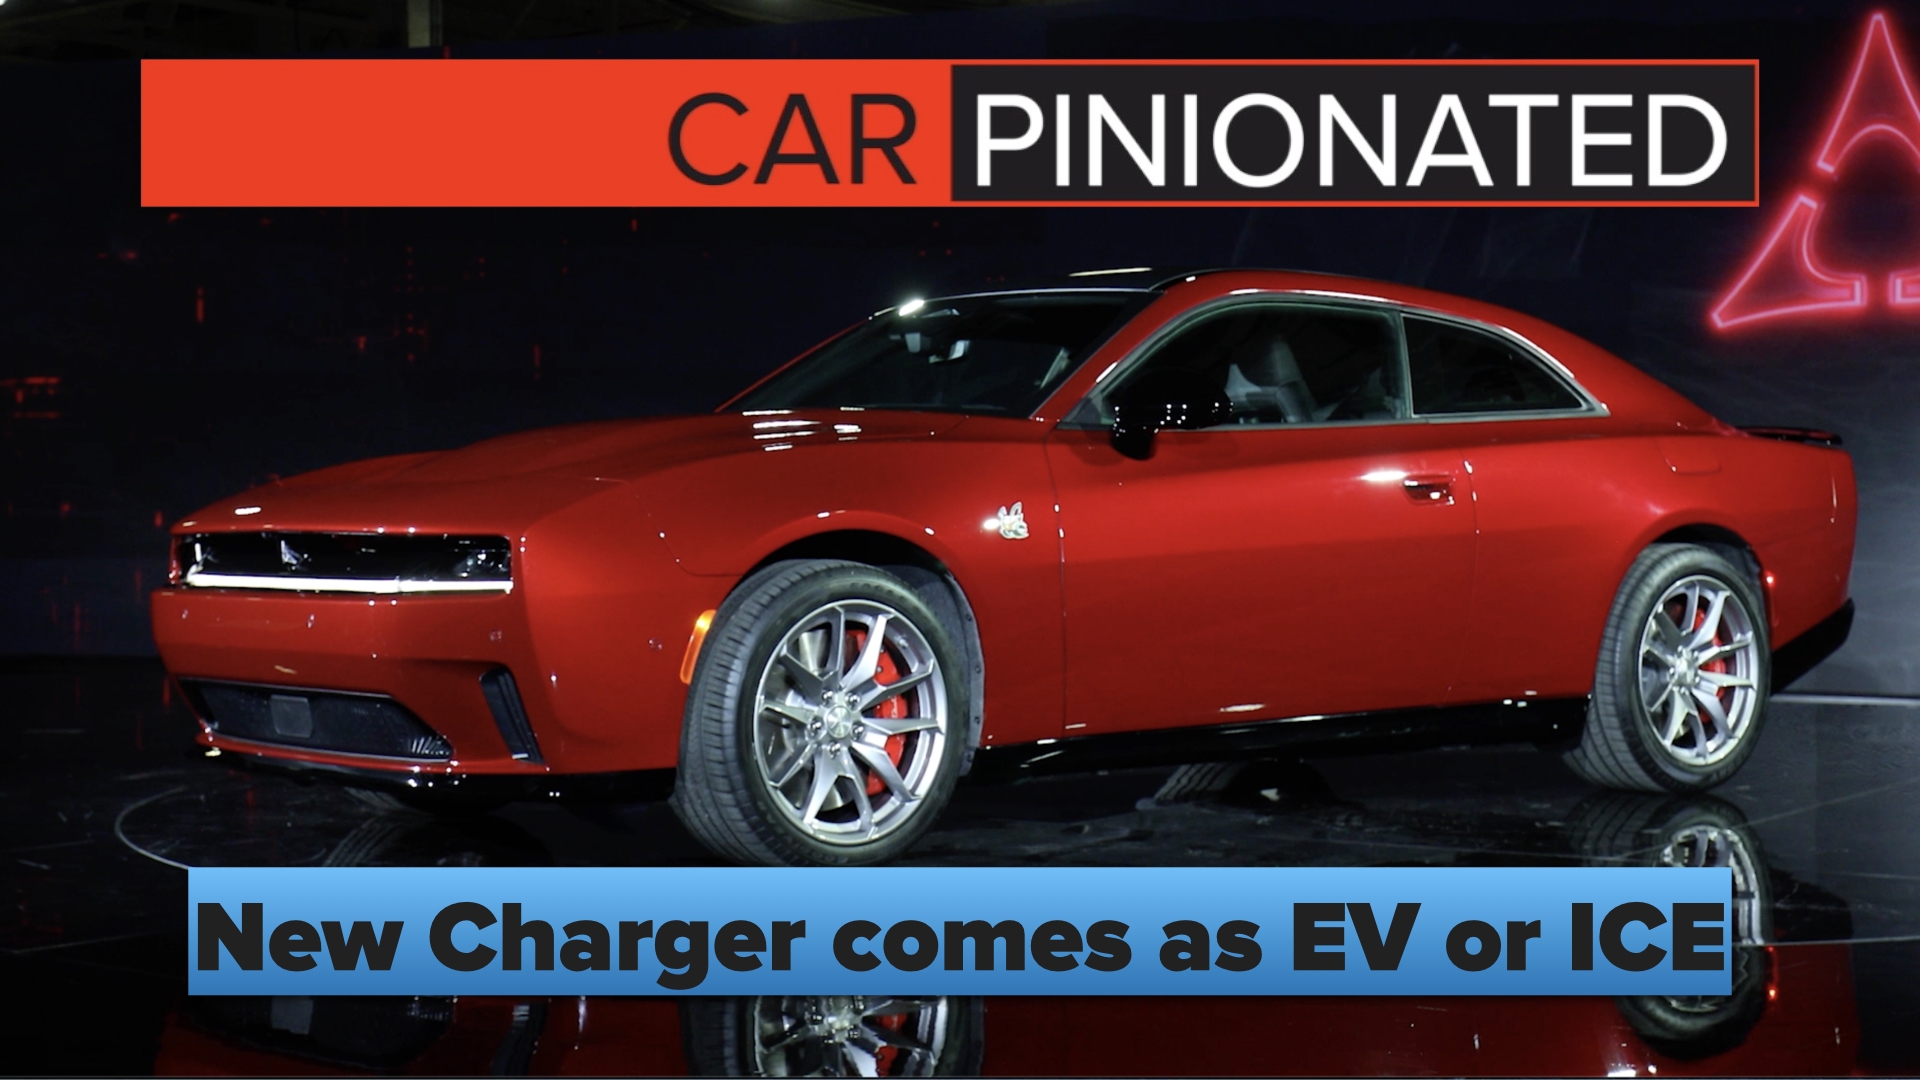 We really like to new Charger which will come as either and EV or ICE